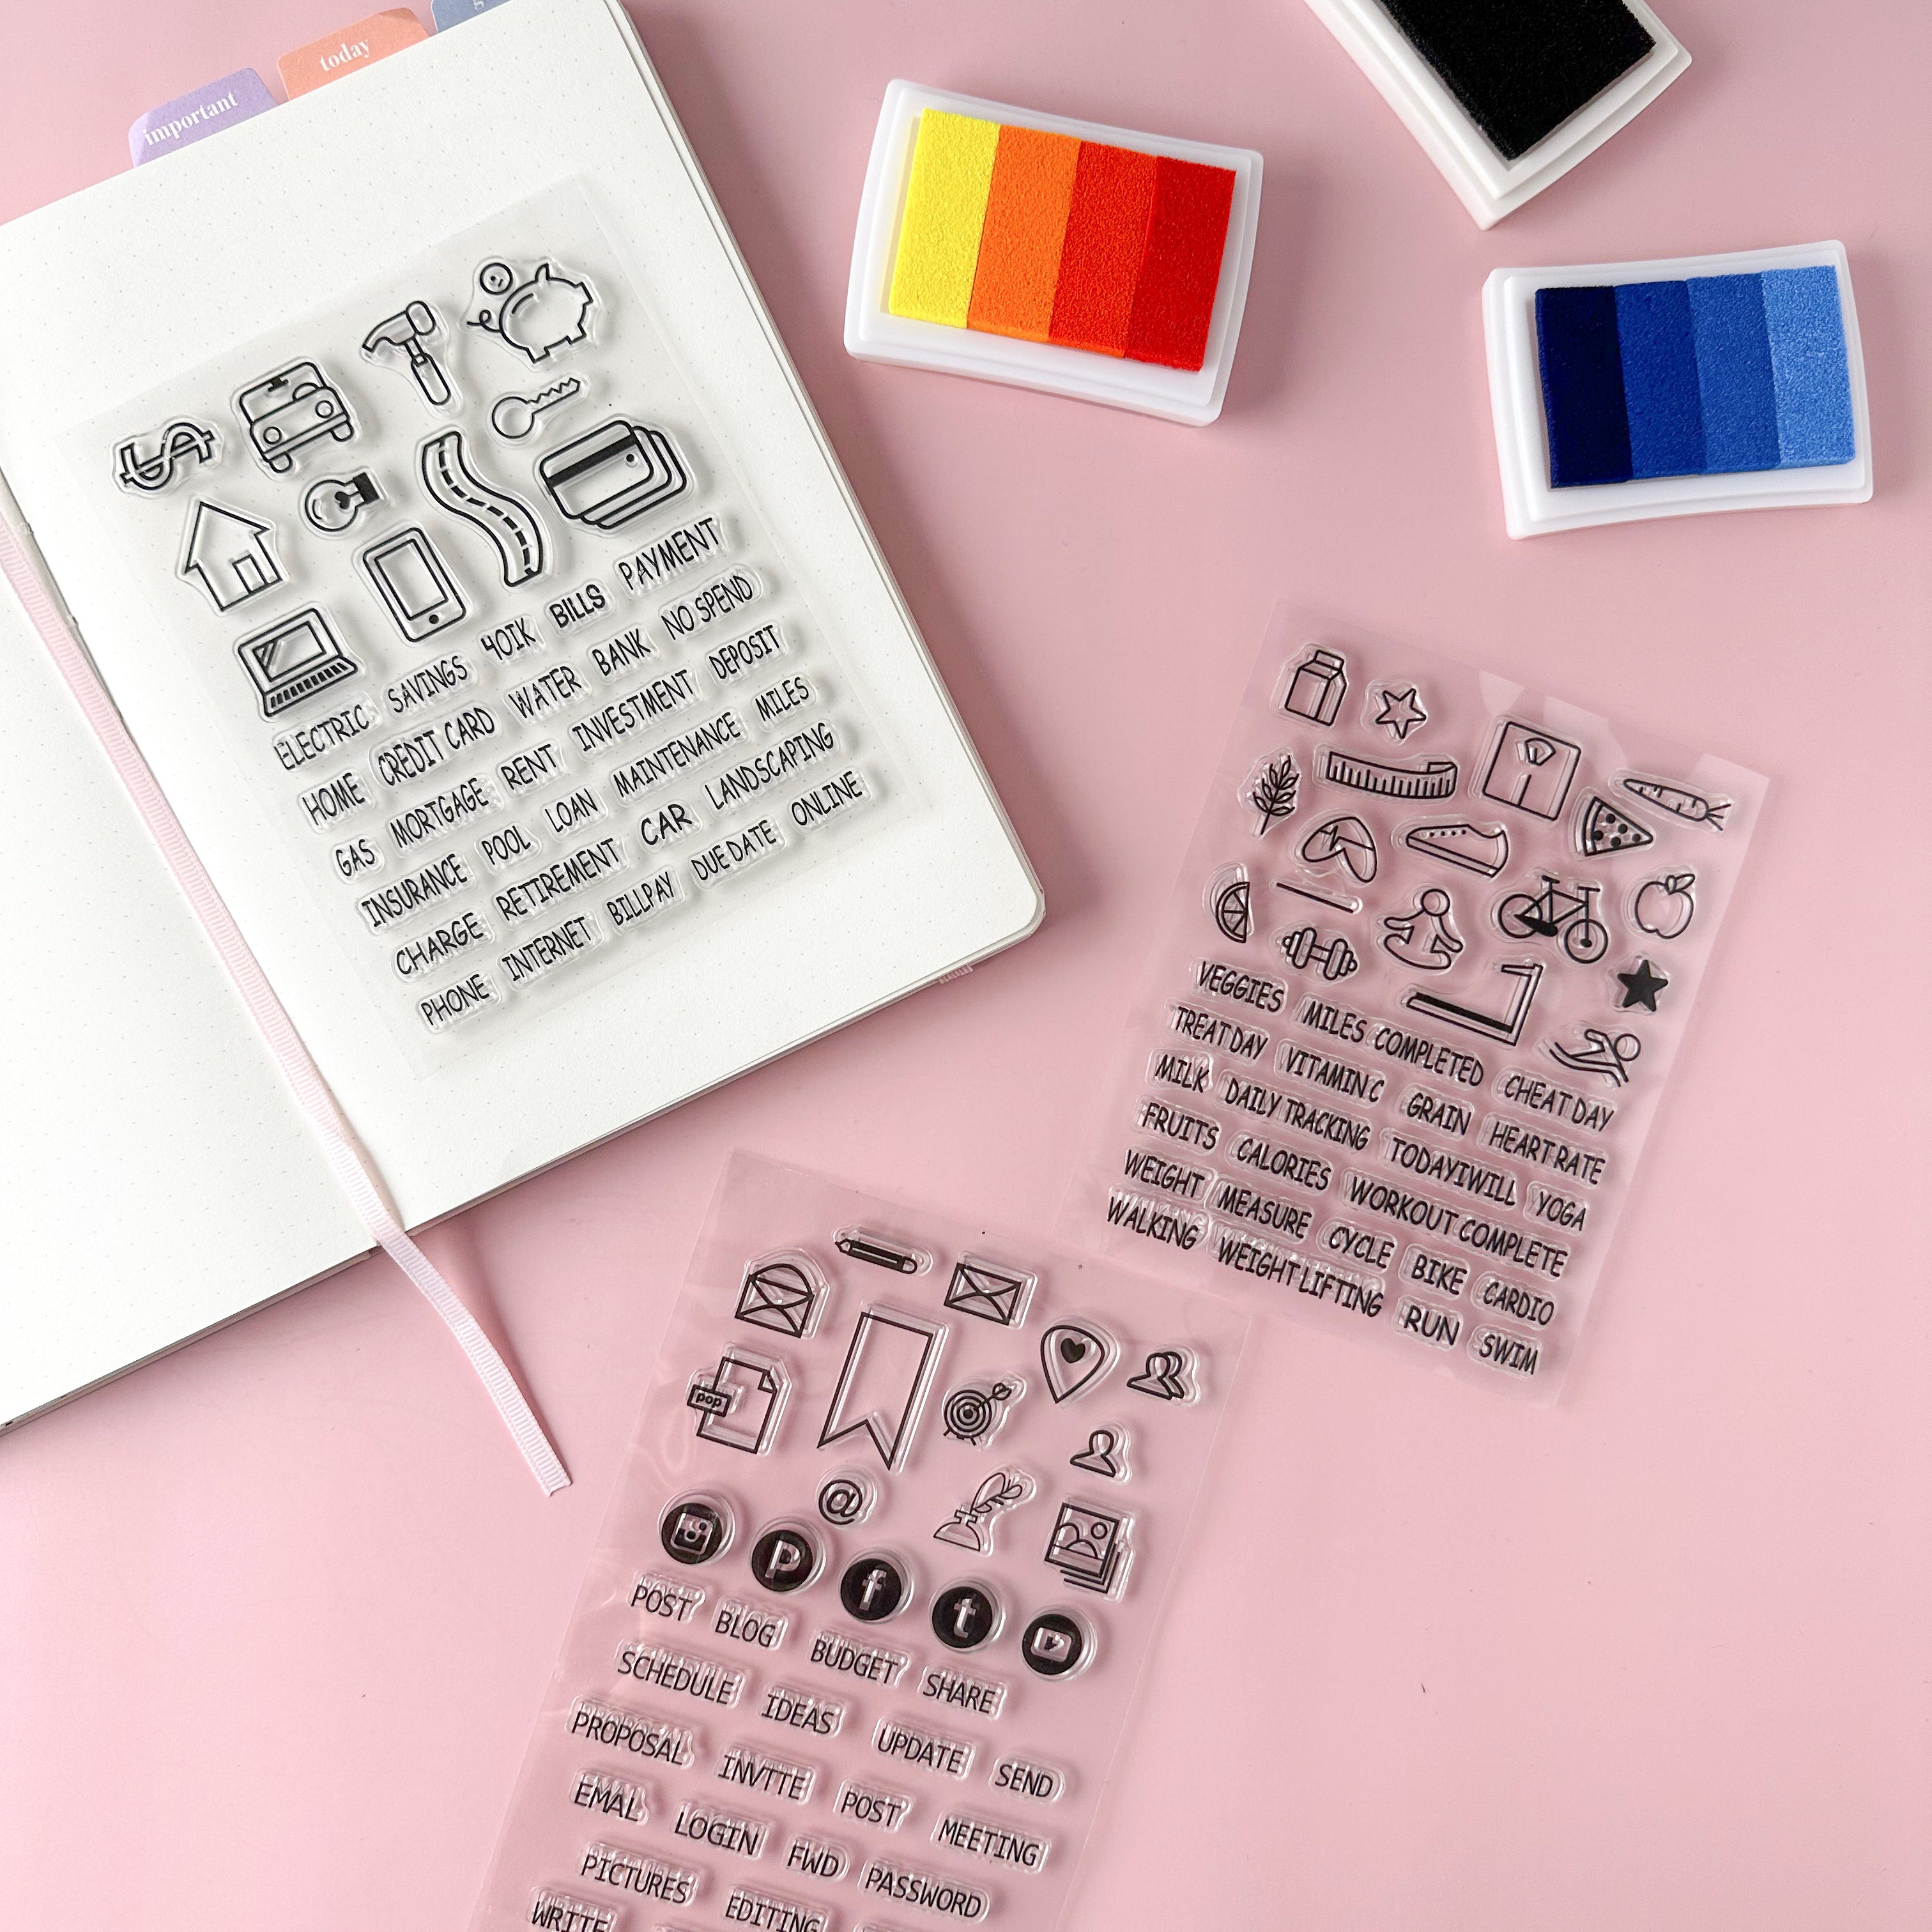 Streamline your blogging and business endeavors with our purpose-built BUJO stamps, including icons and symbols for blog topic brainstorming, content creation, promotion planning, and social media engagement. This stamp collection is sold at BBB Supplies Craft Shop.